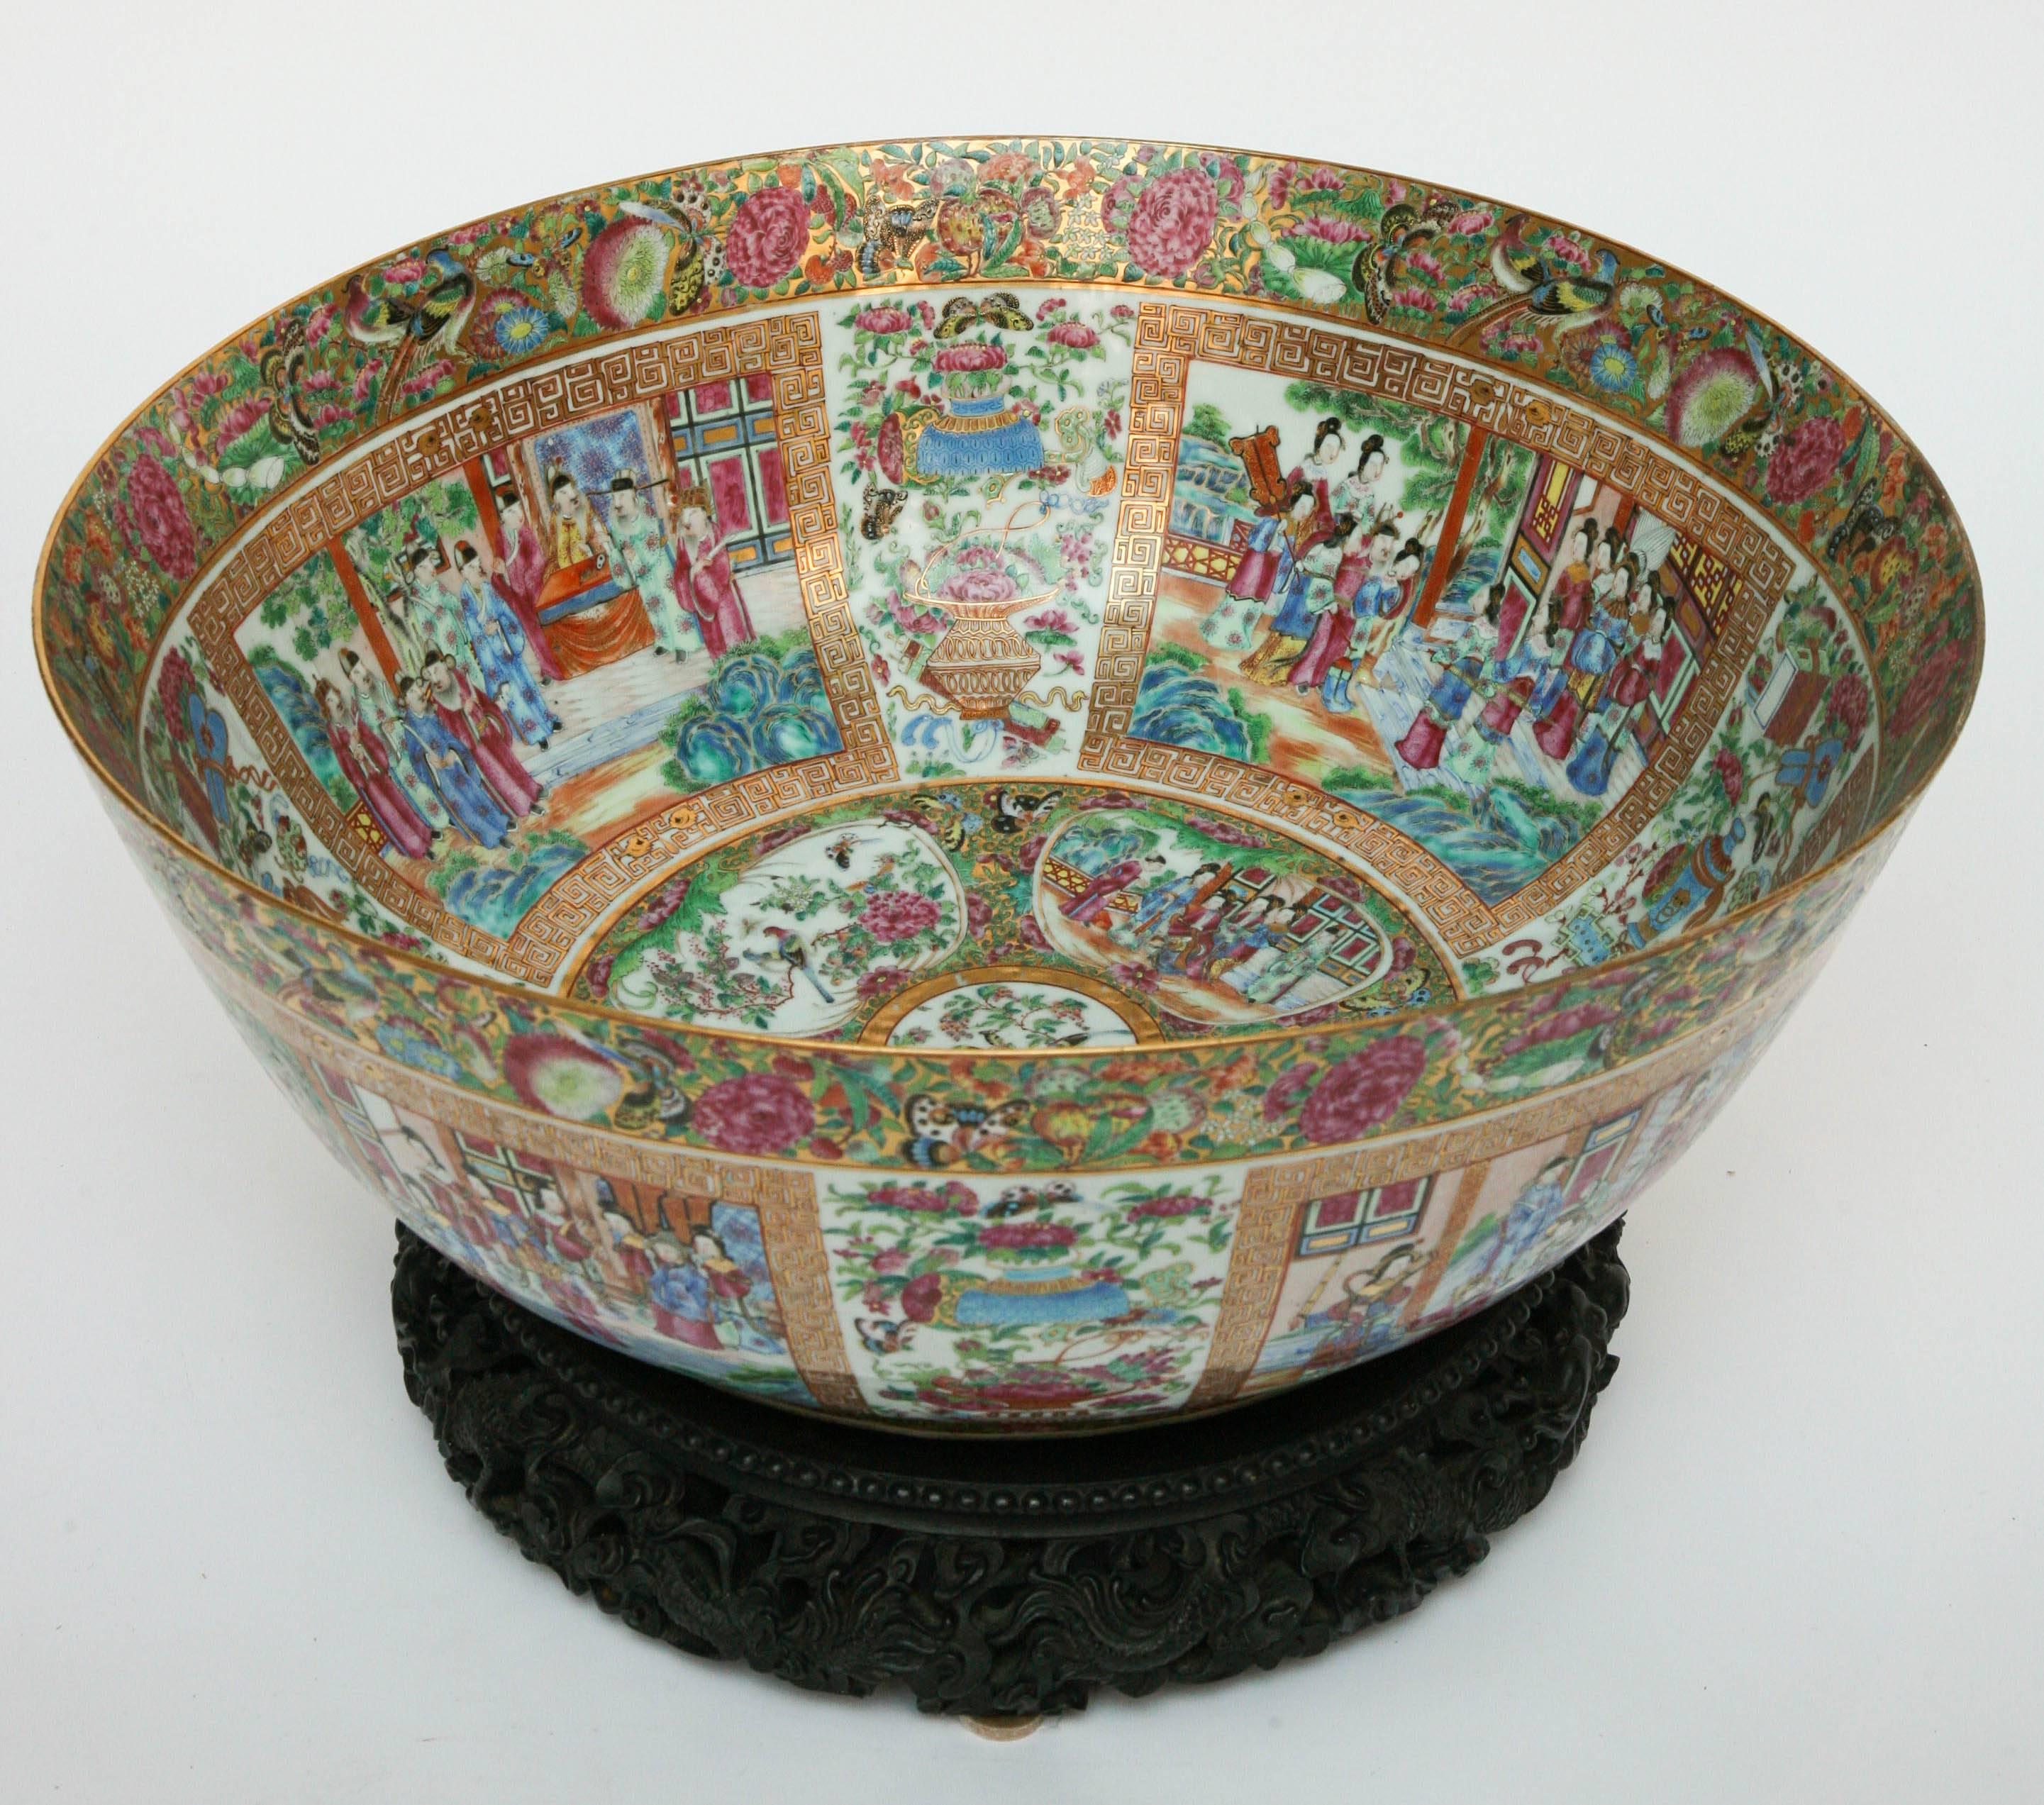 Carved Important, Enormous, and Elaborate 19th Century Rose Mandarin Punch Bowl